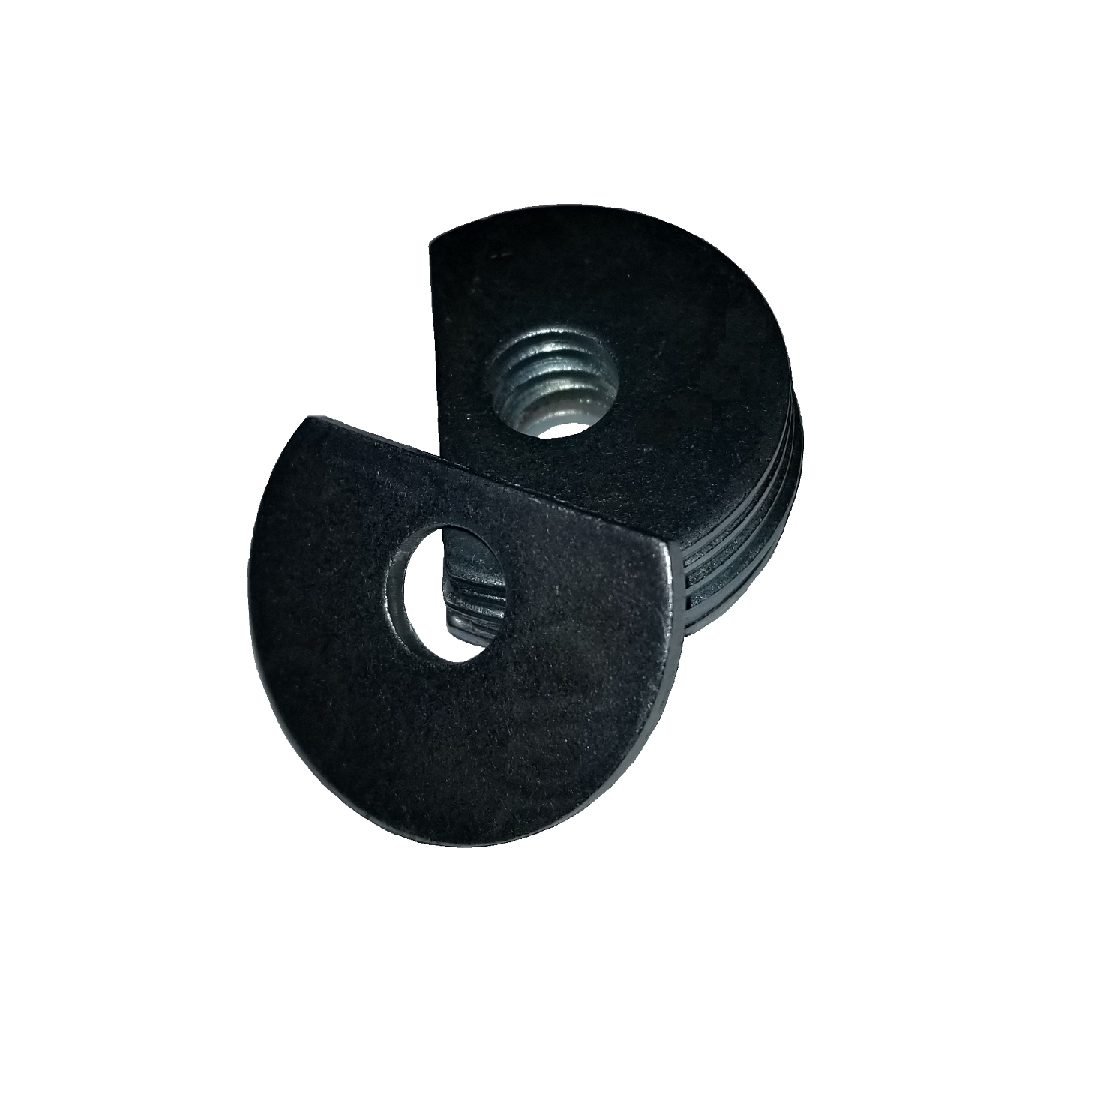 Clipped OD Washer - 0.422 ID, 0.812 OD, 0.120 Thick, Spring Steel - Hard, Zinc & Clear